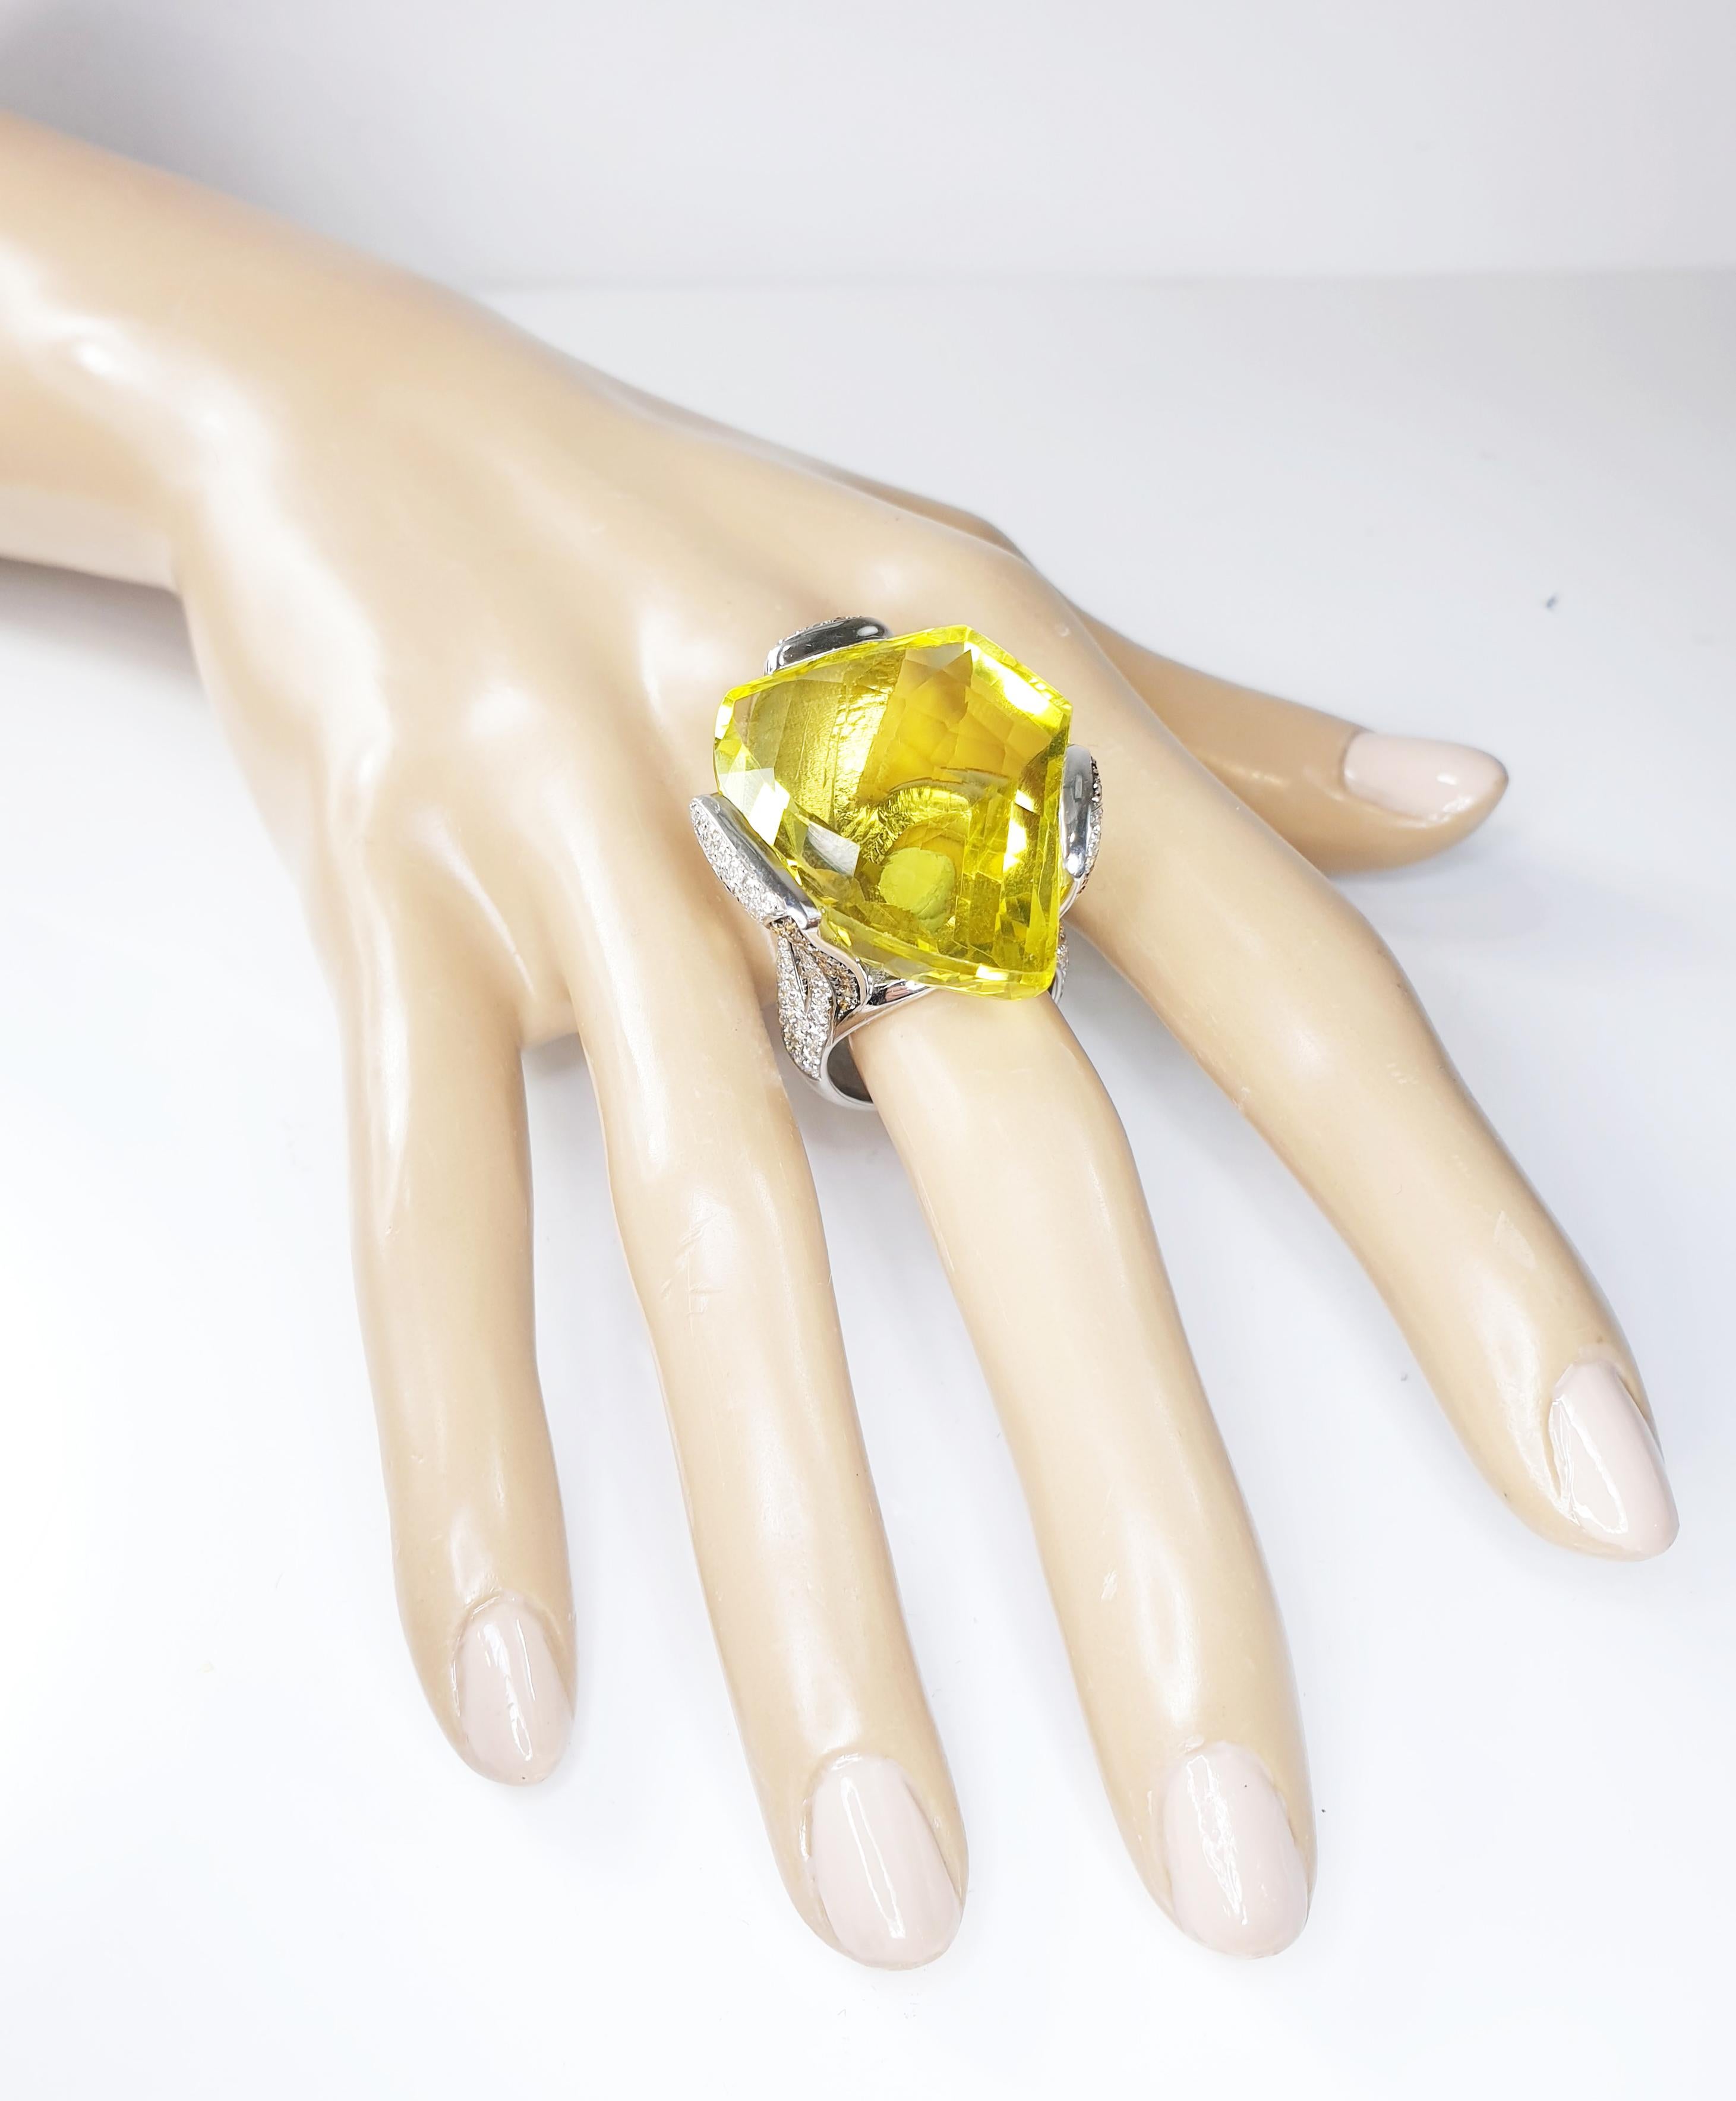 Women's Multifaceted 51 Carat Citrine Quartz with Diamonds and 18 Karat White Gold Ring For Sale